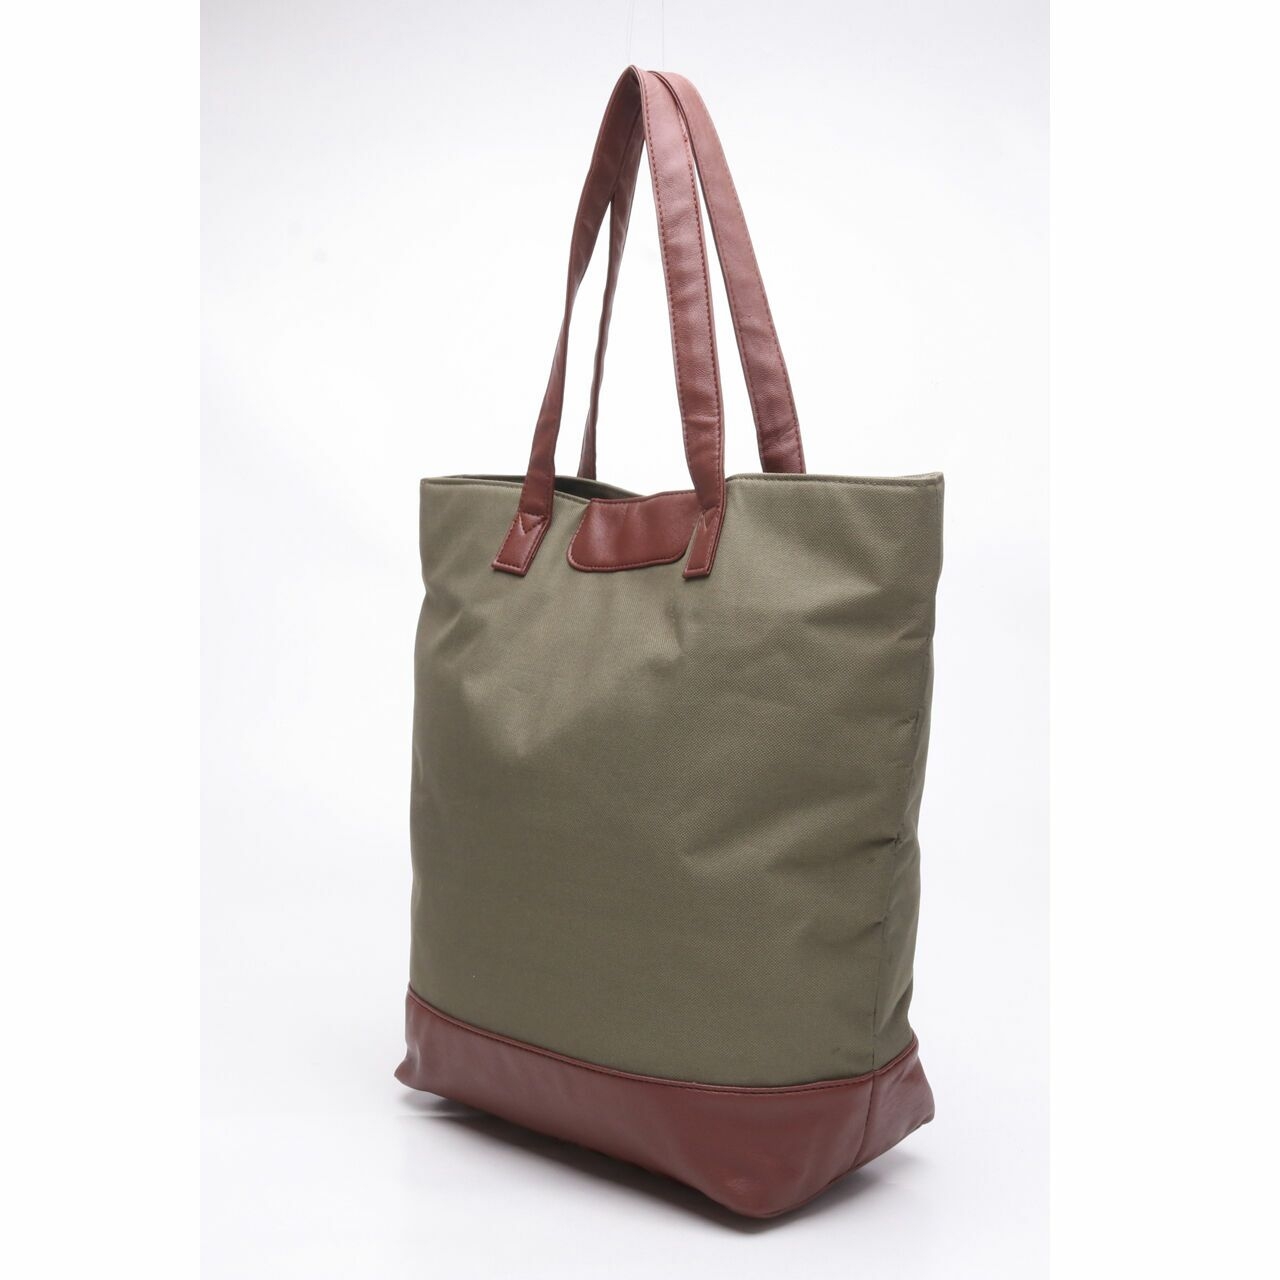 The Little Things She Needs Brown & Army Tote Bag